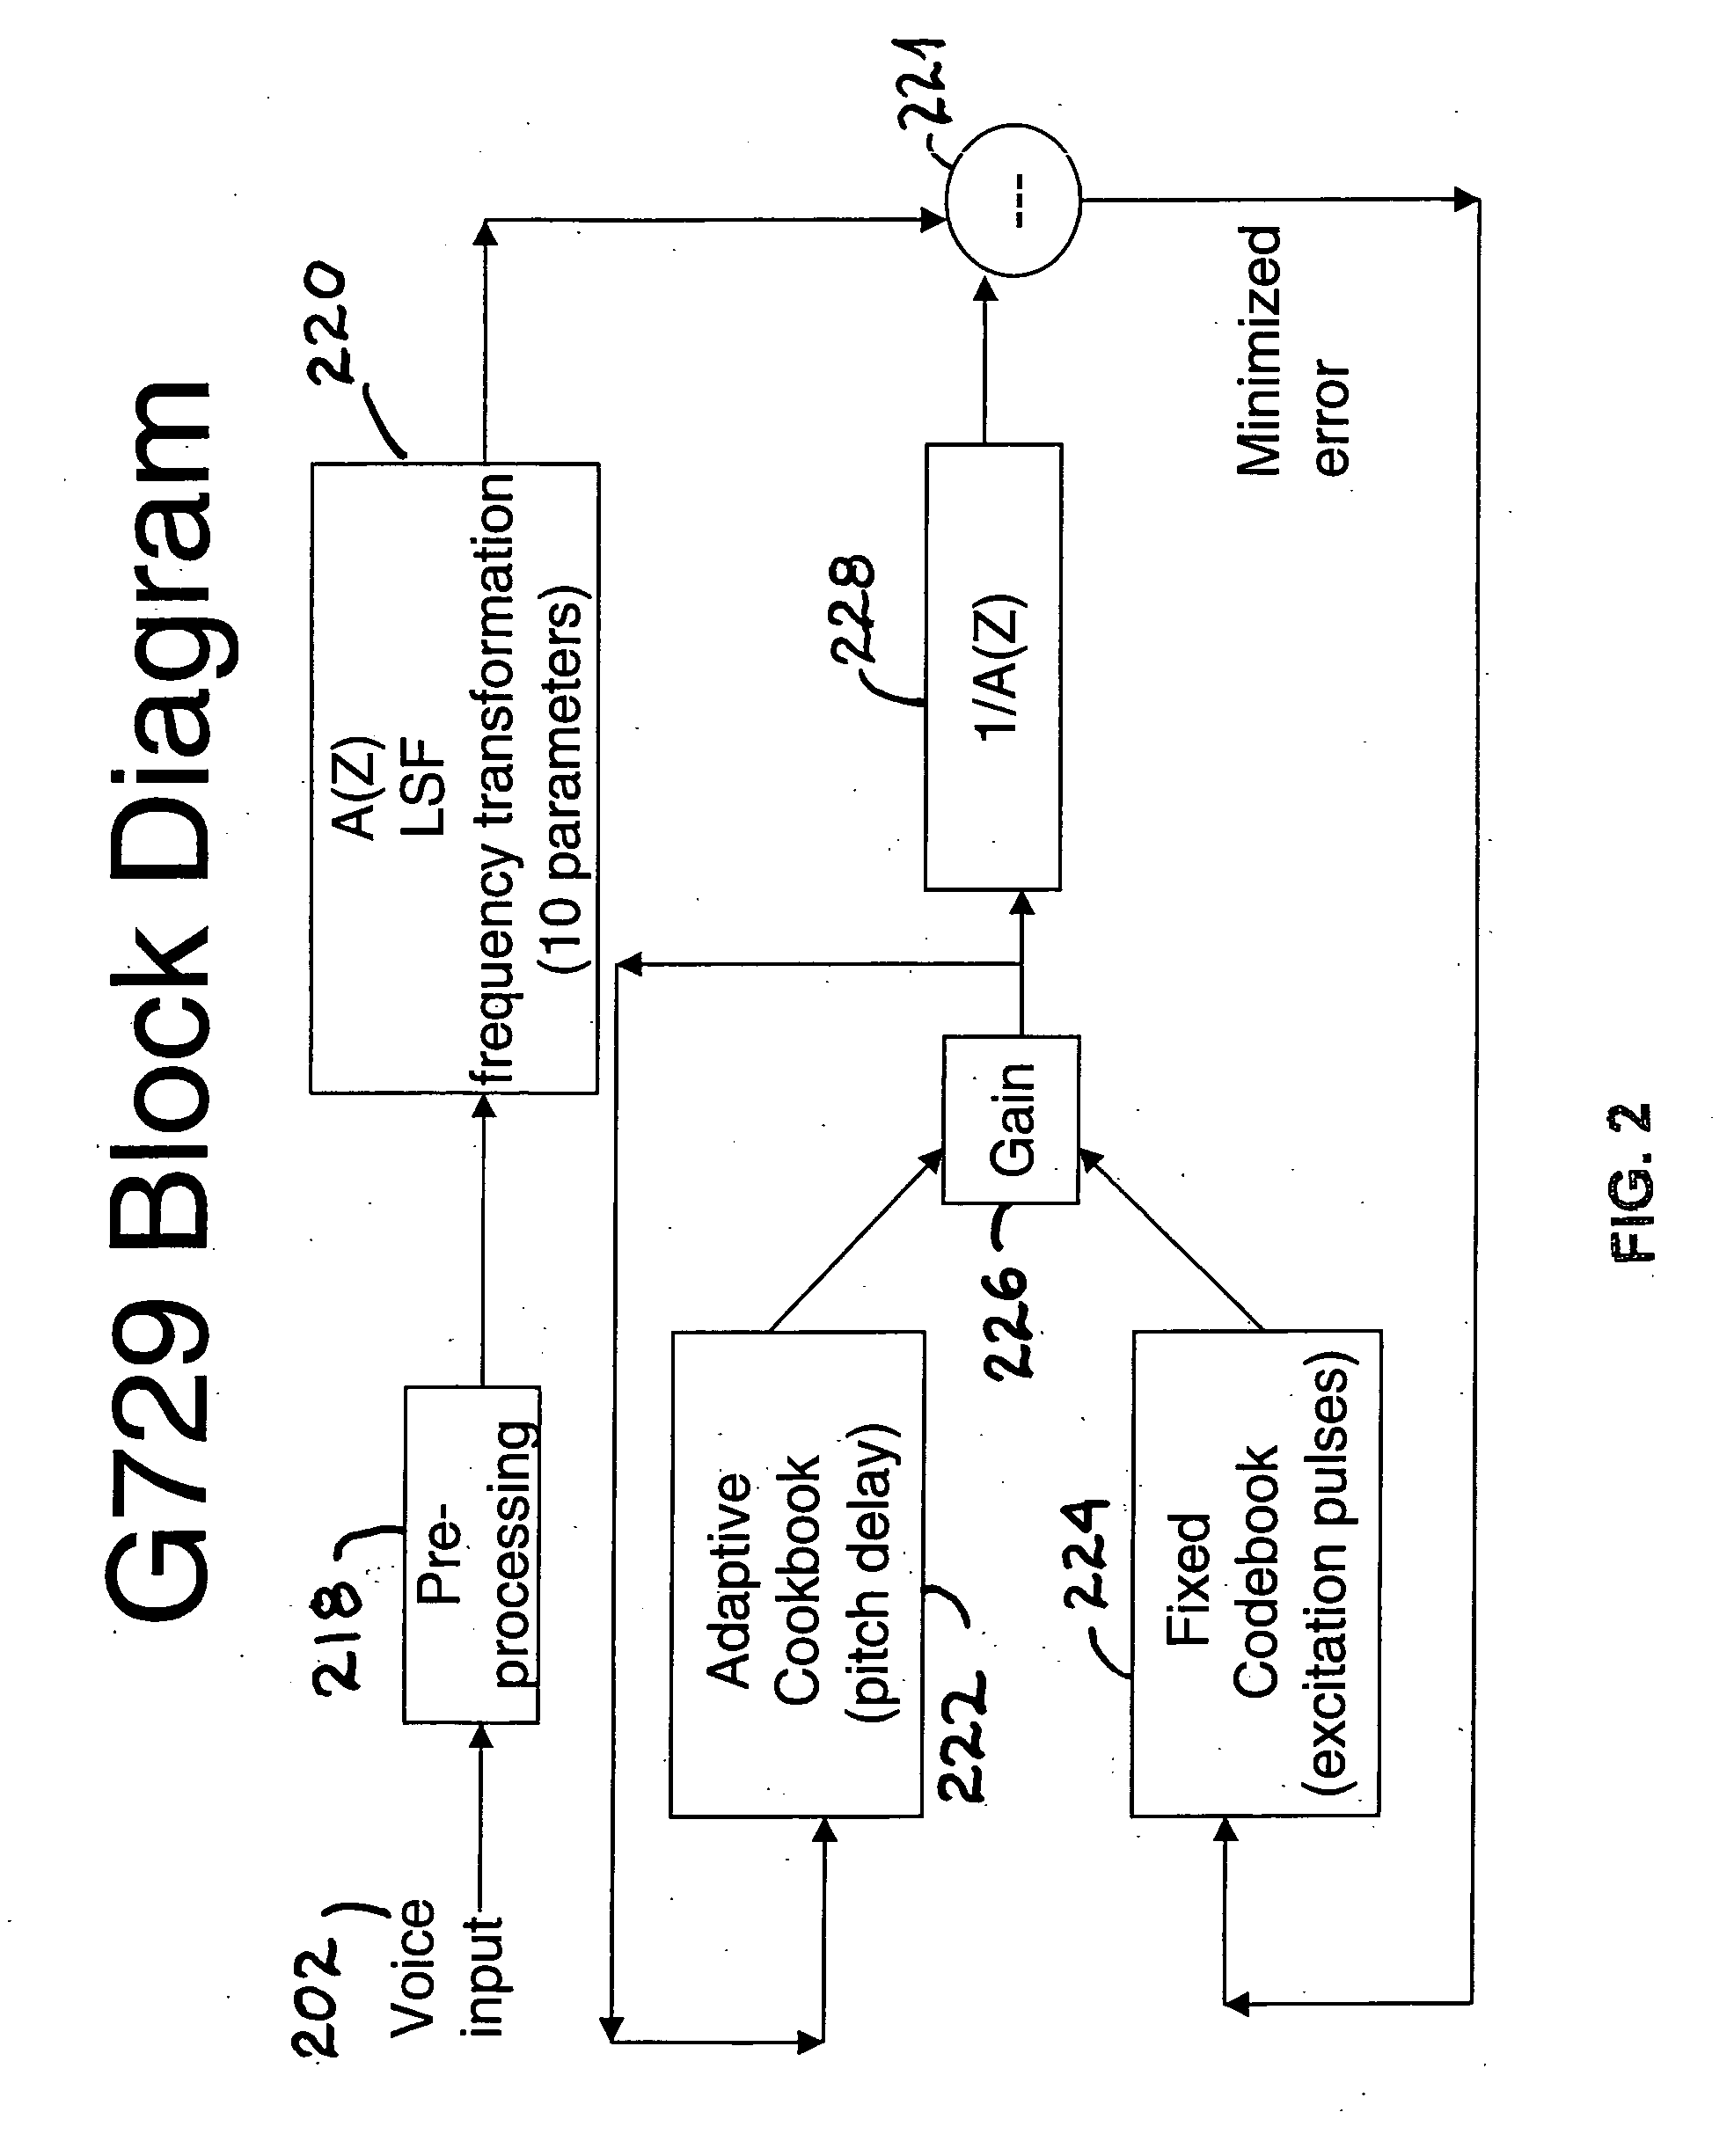 Voice packet identification based on celp compression parameters